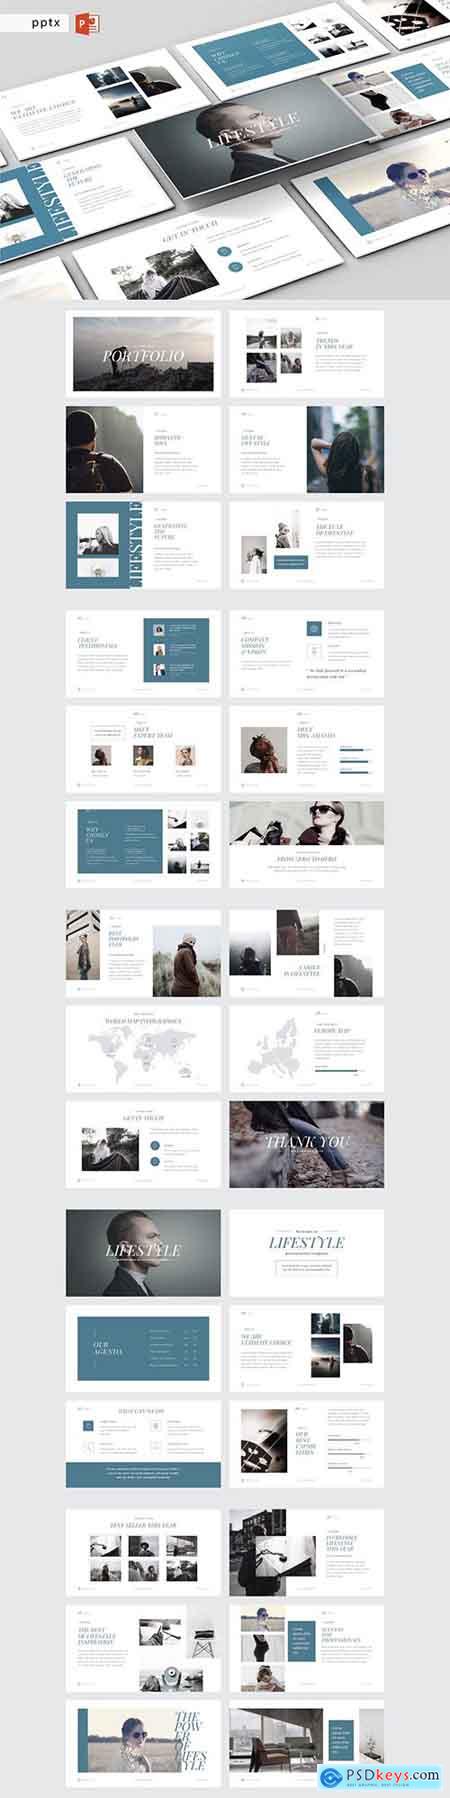 LIFESTYLE - Multipurpose Powerpoint Template V62